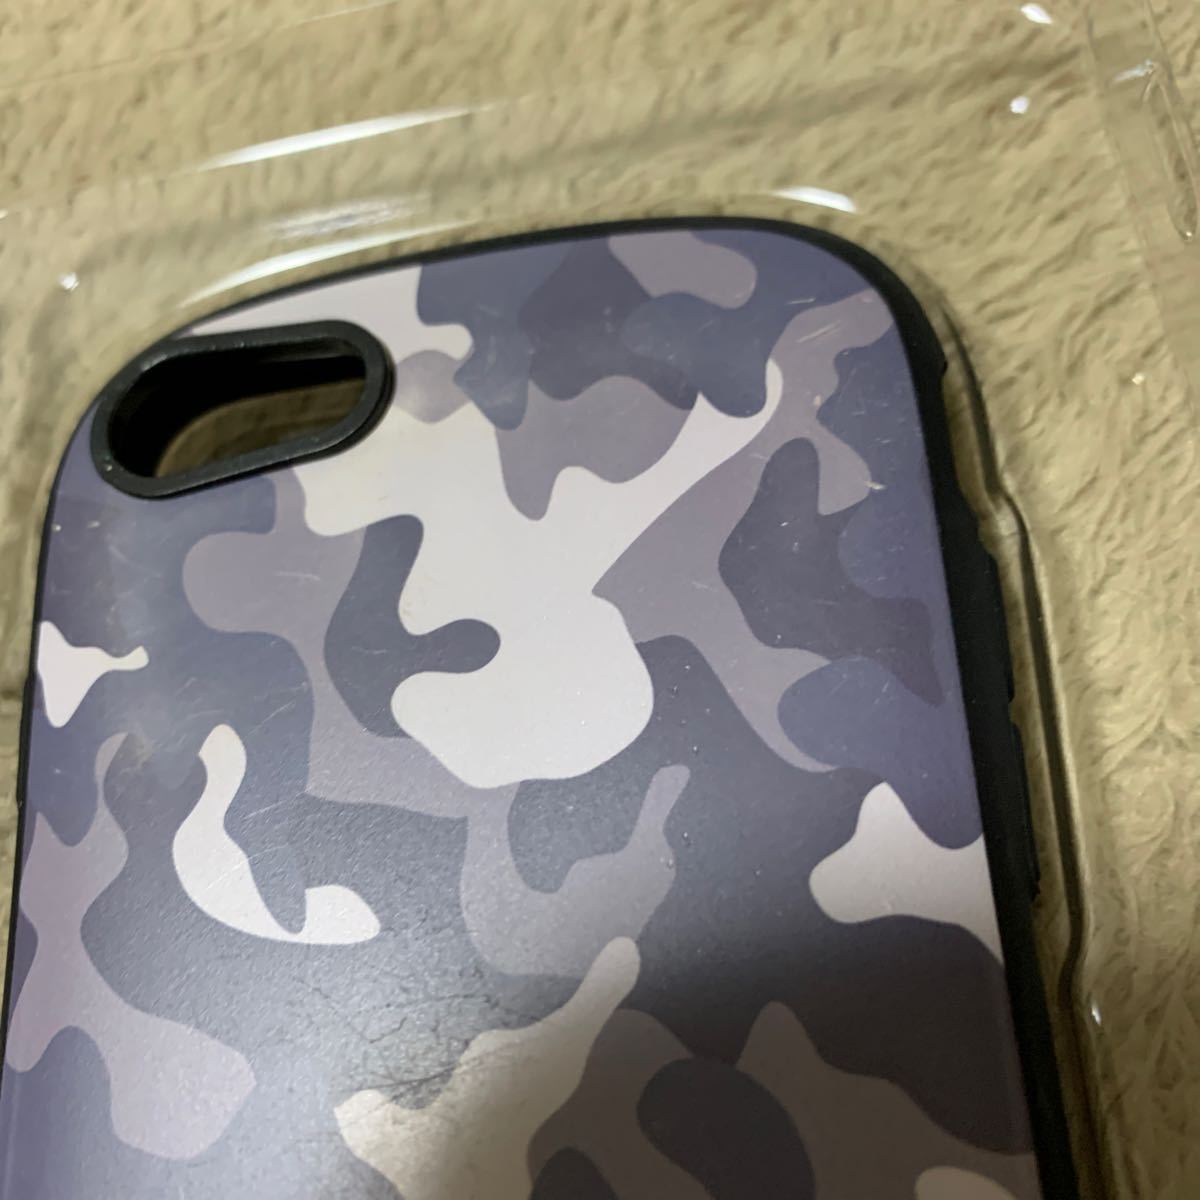 602t2522☆ iFace First Class Military iPhone SE(2020モデル)/8/7 ケース 耐衝撃 [グレー]_画像3